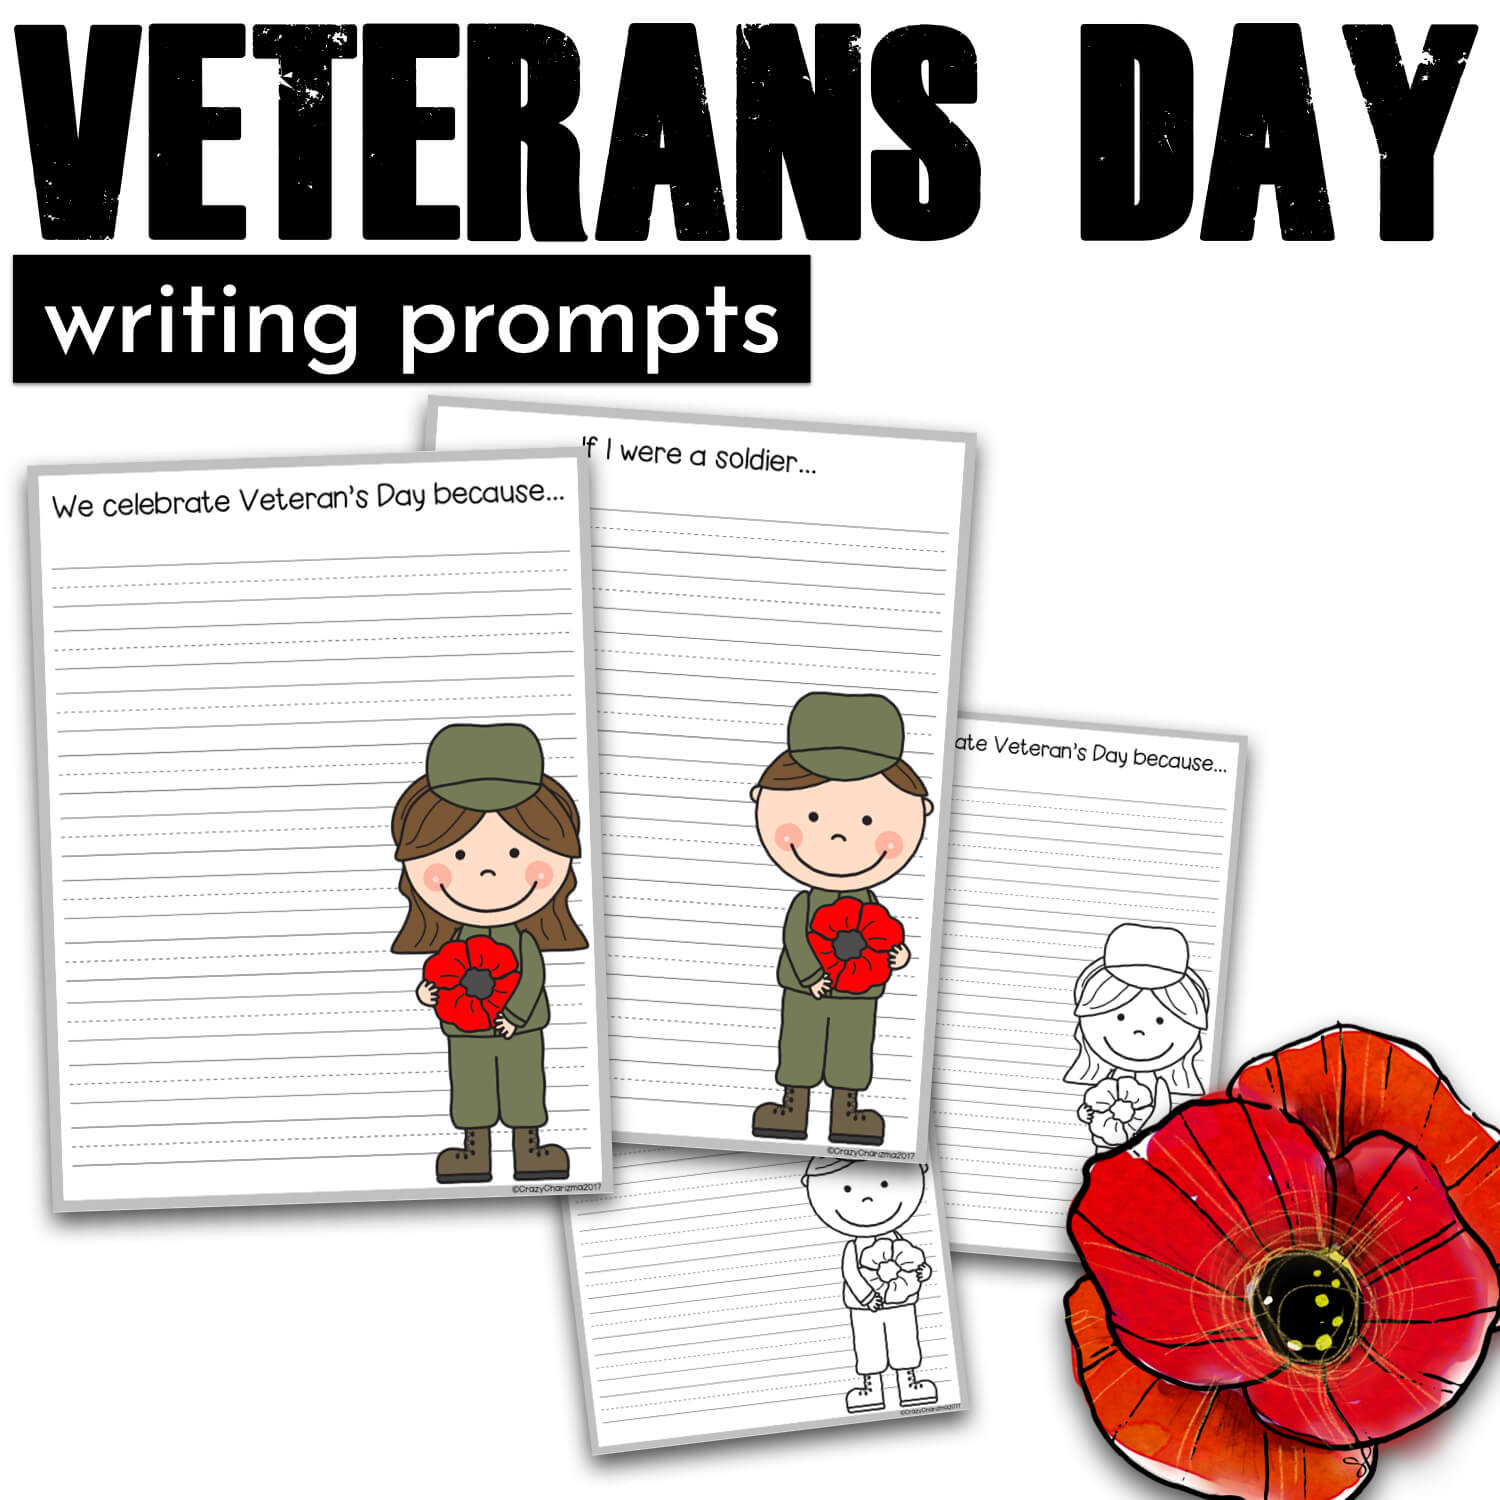 Veterans Day Writing Prompts